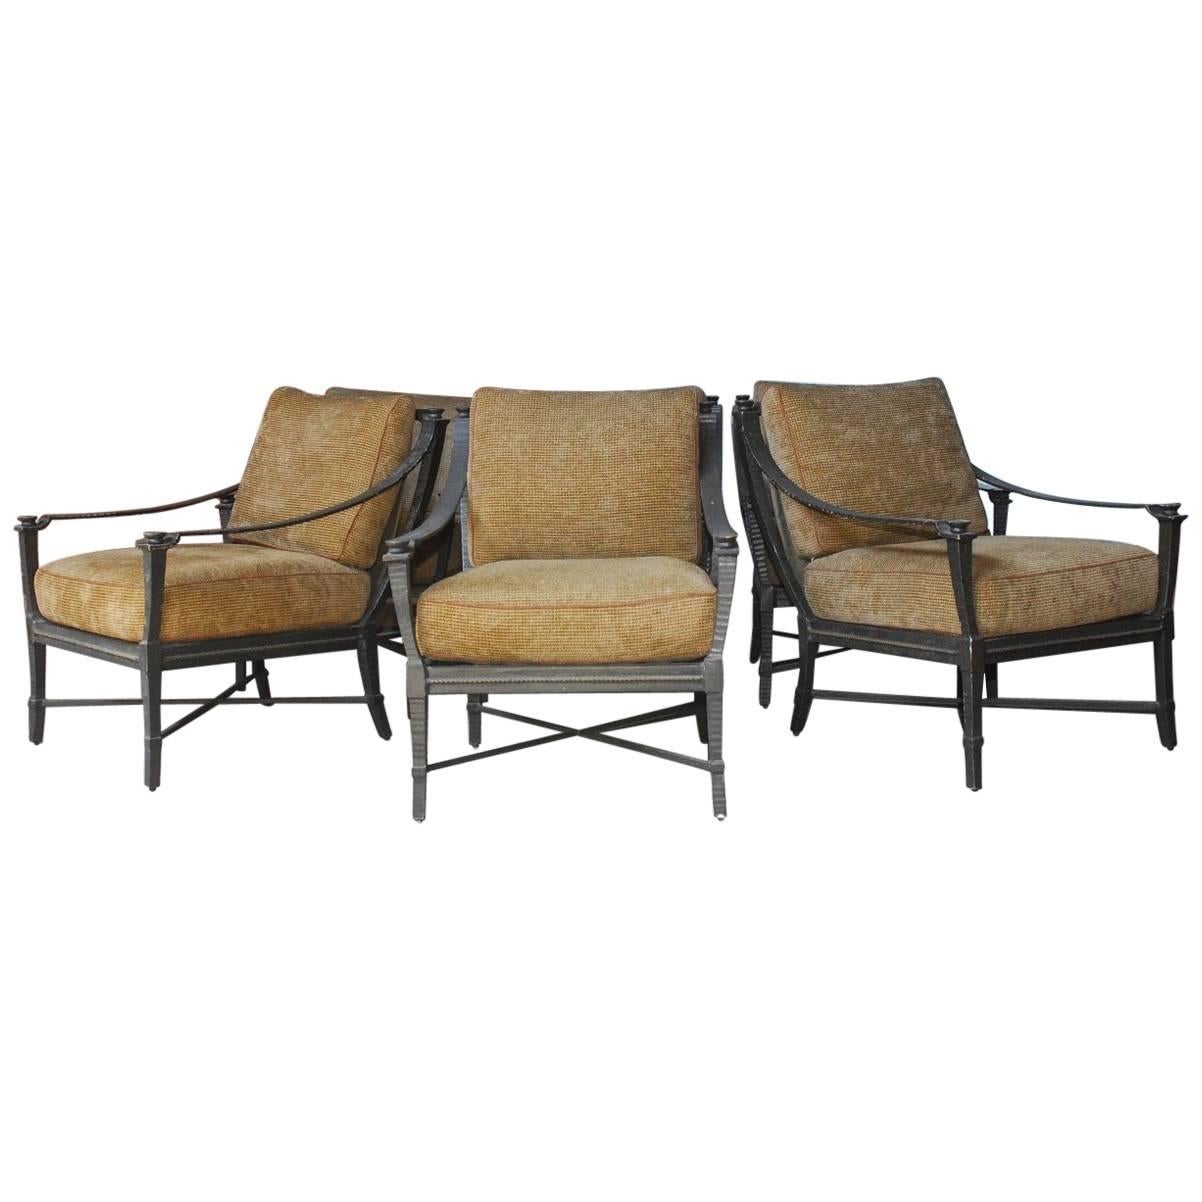 Six Andalusia Royal Lounge Chairs by Richard Frinier for Century